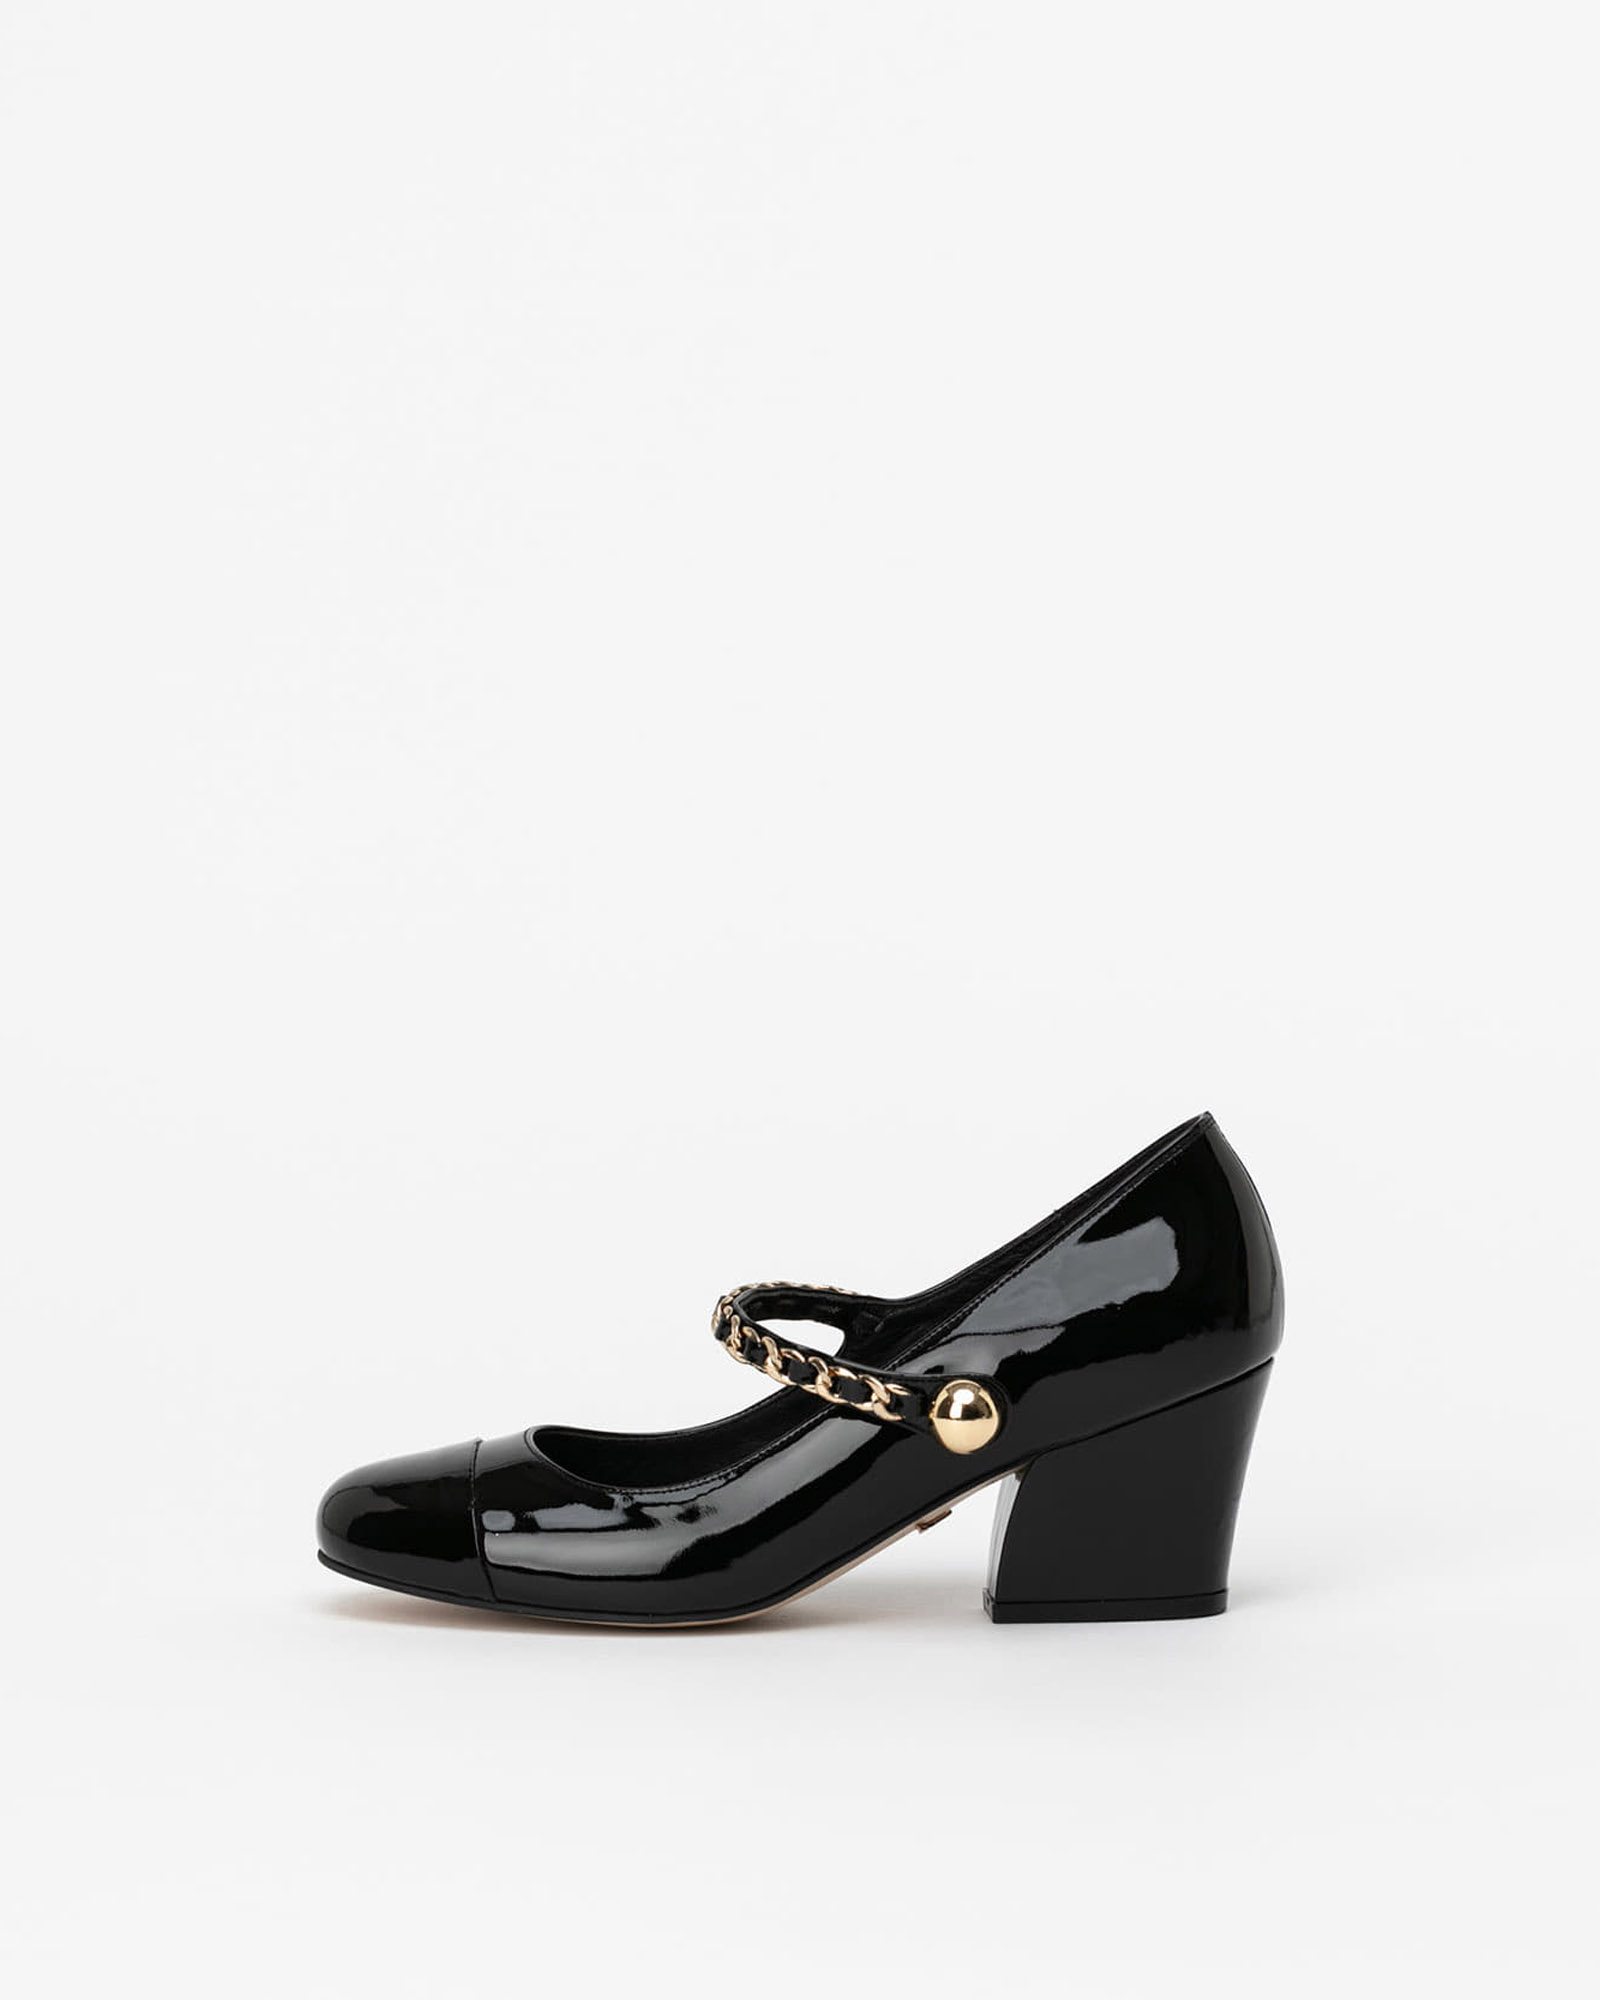 Aria Chained Maryjane Pumps in Black Patent